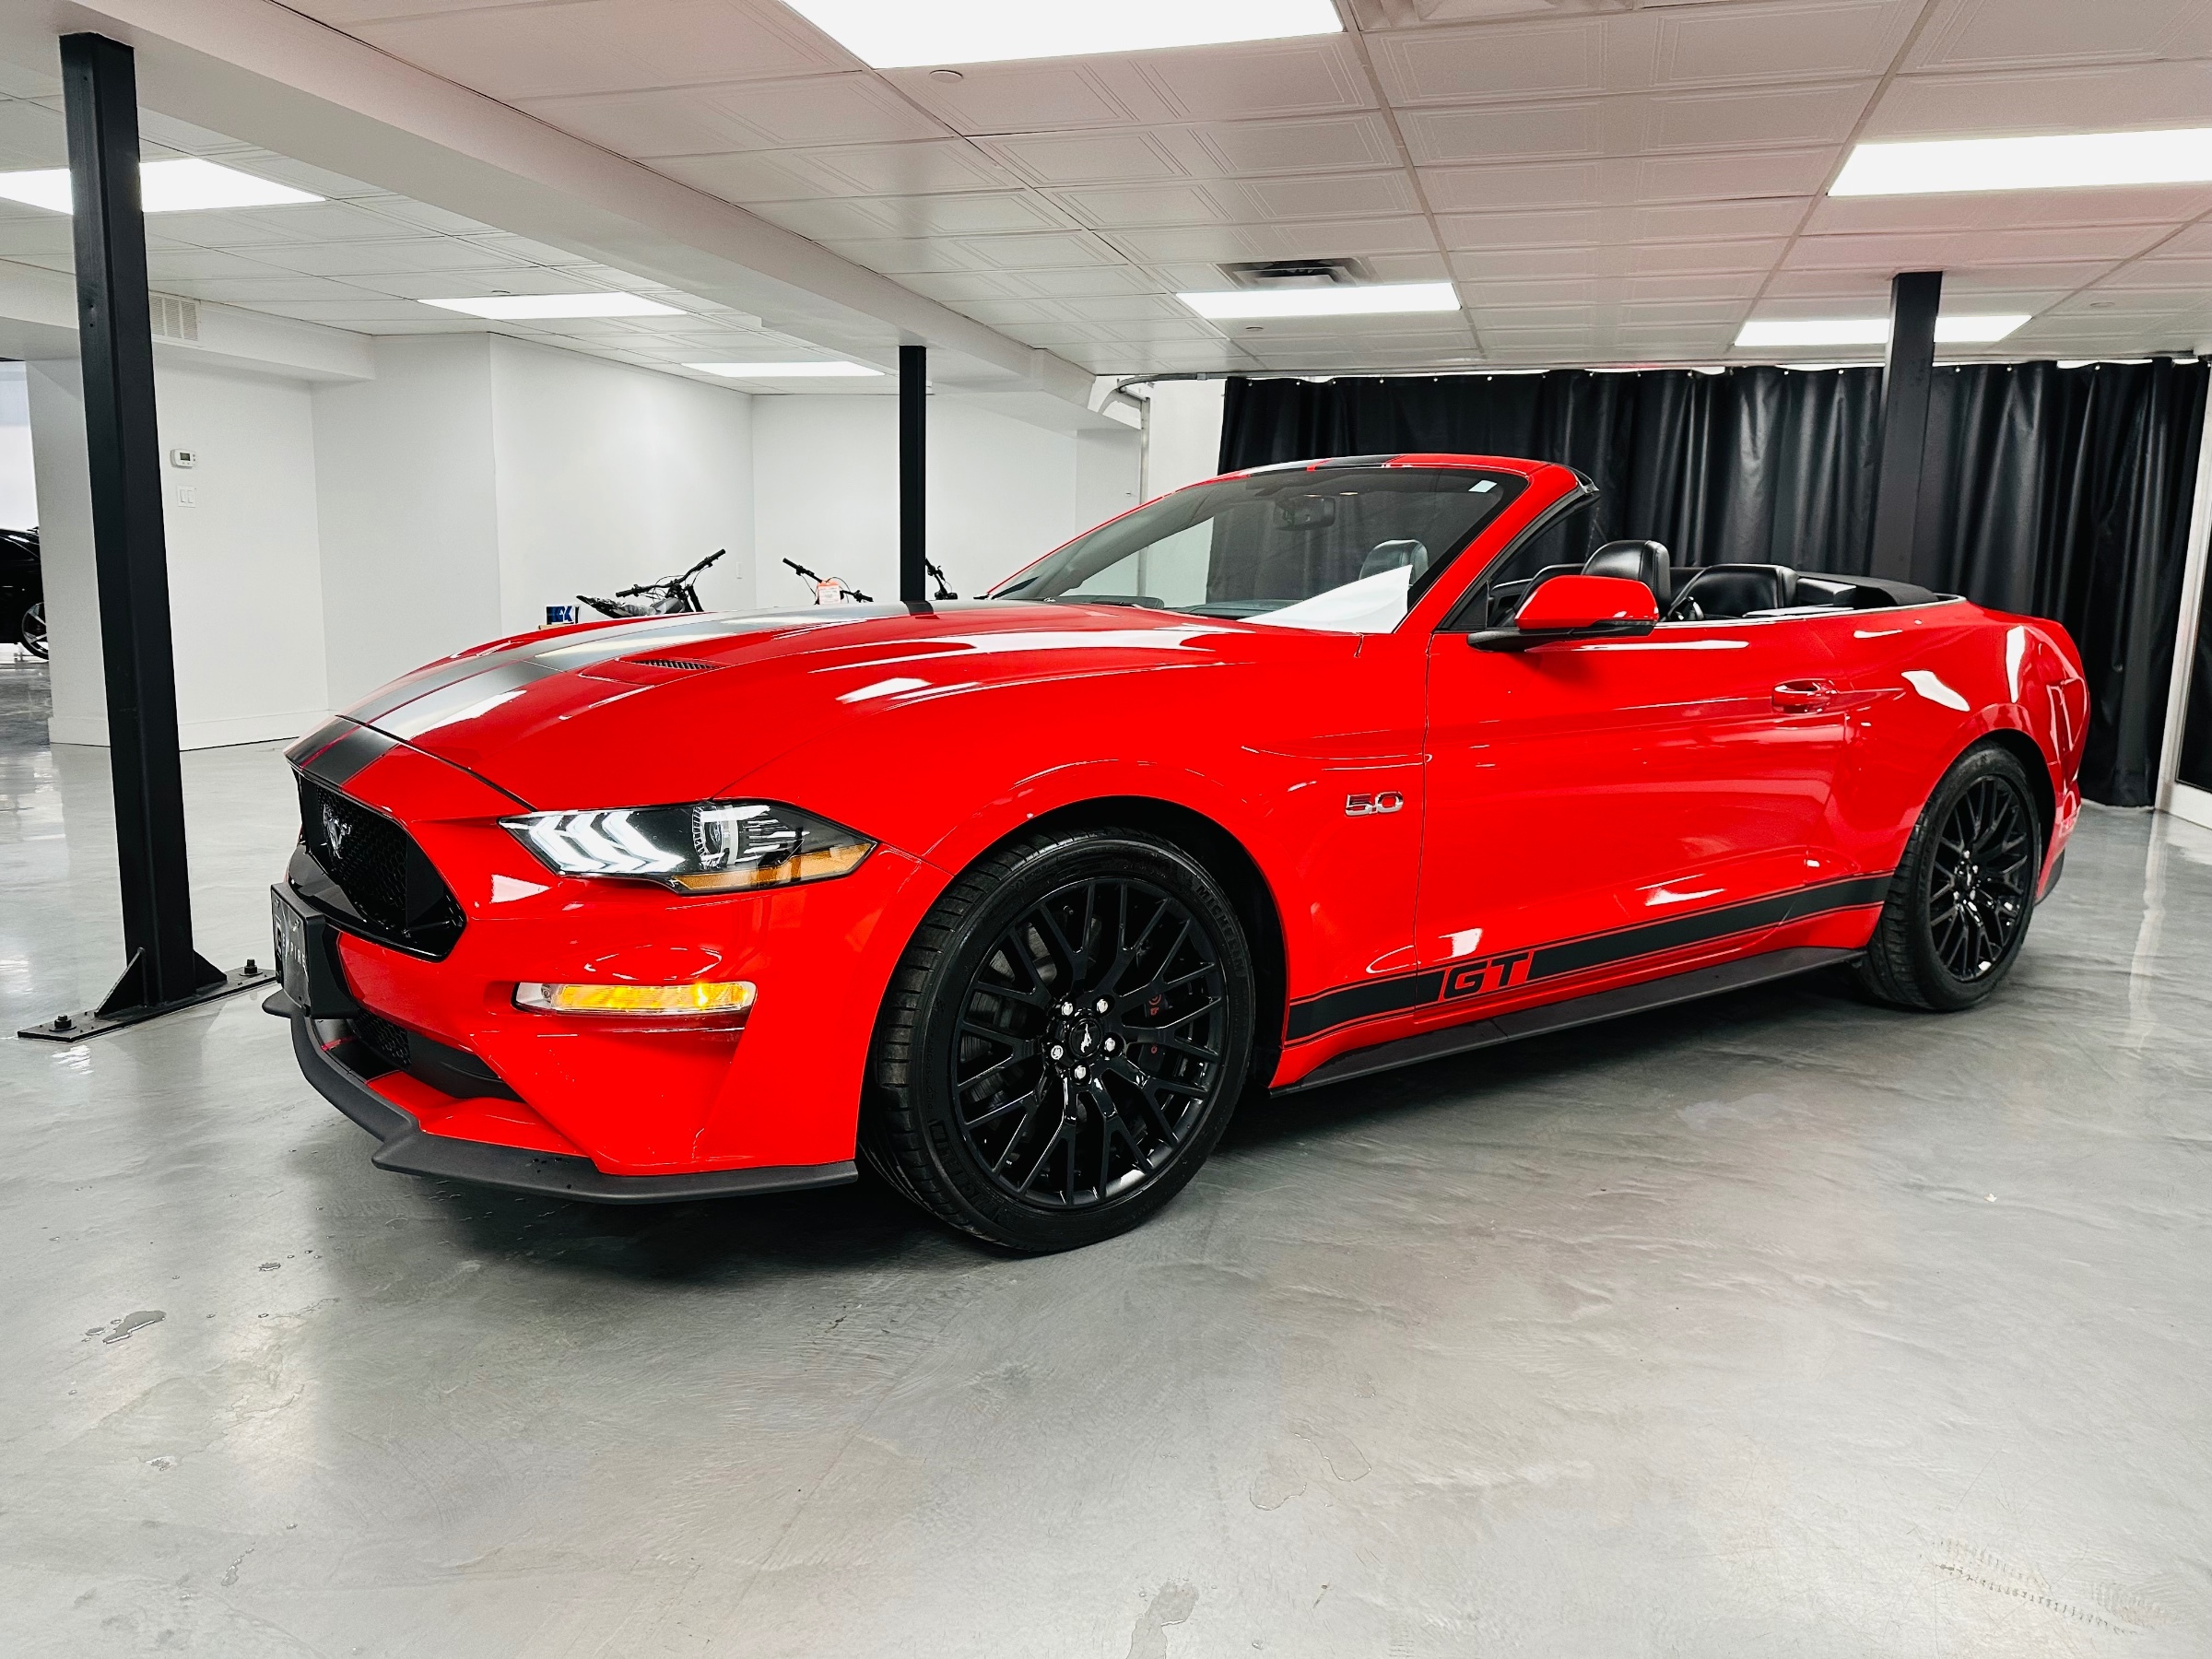 2019 Ford Mustang GT PREMIUM CONVERTIBLE V8 5.0L